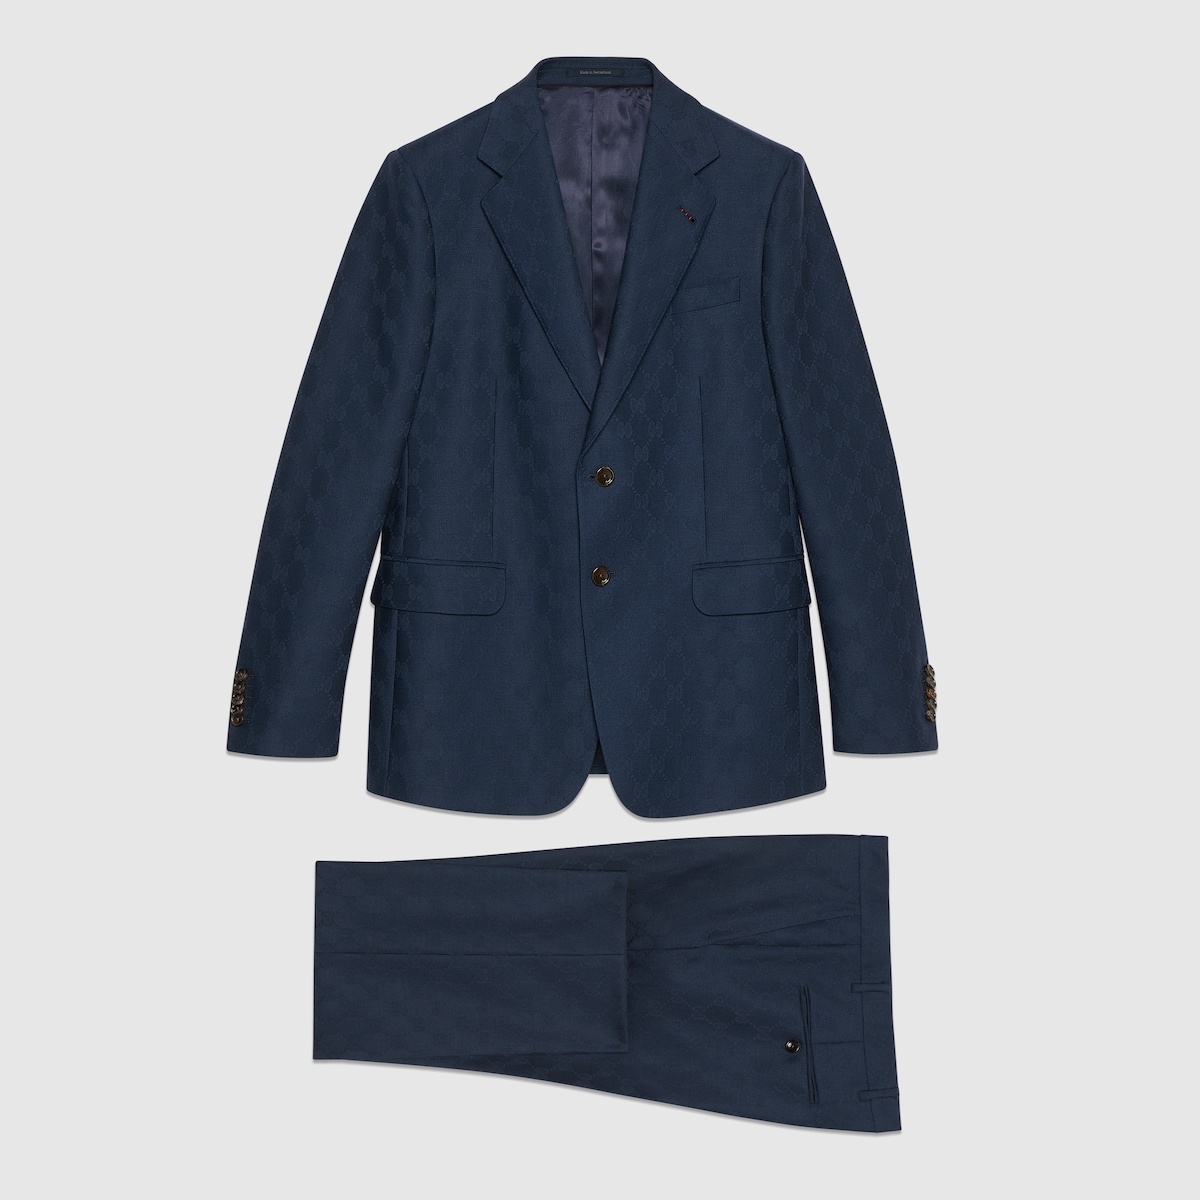 GG wool suit - 1